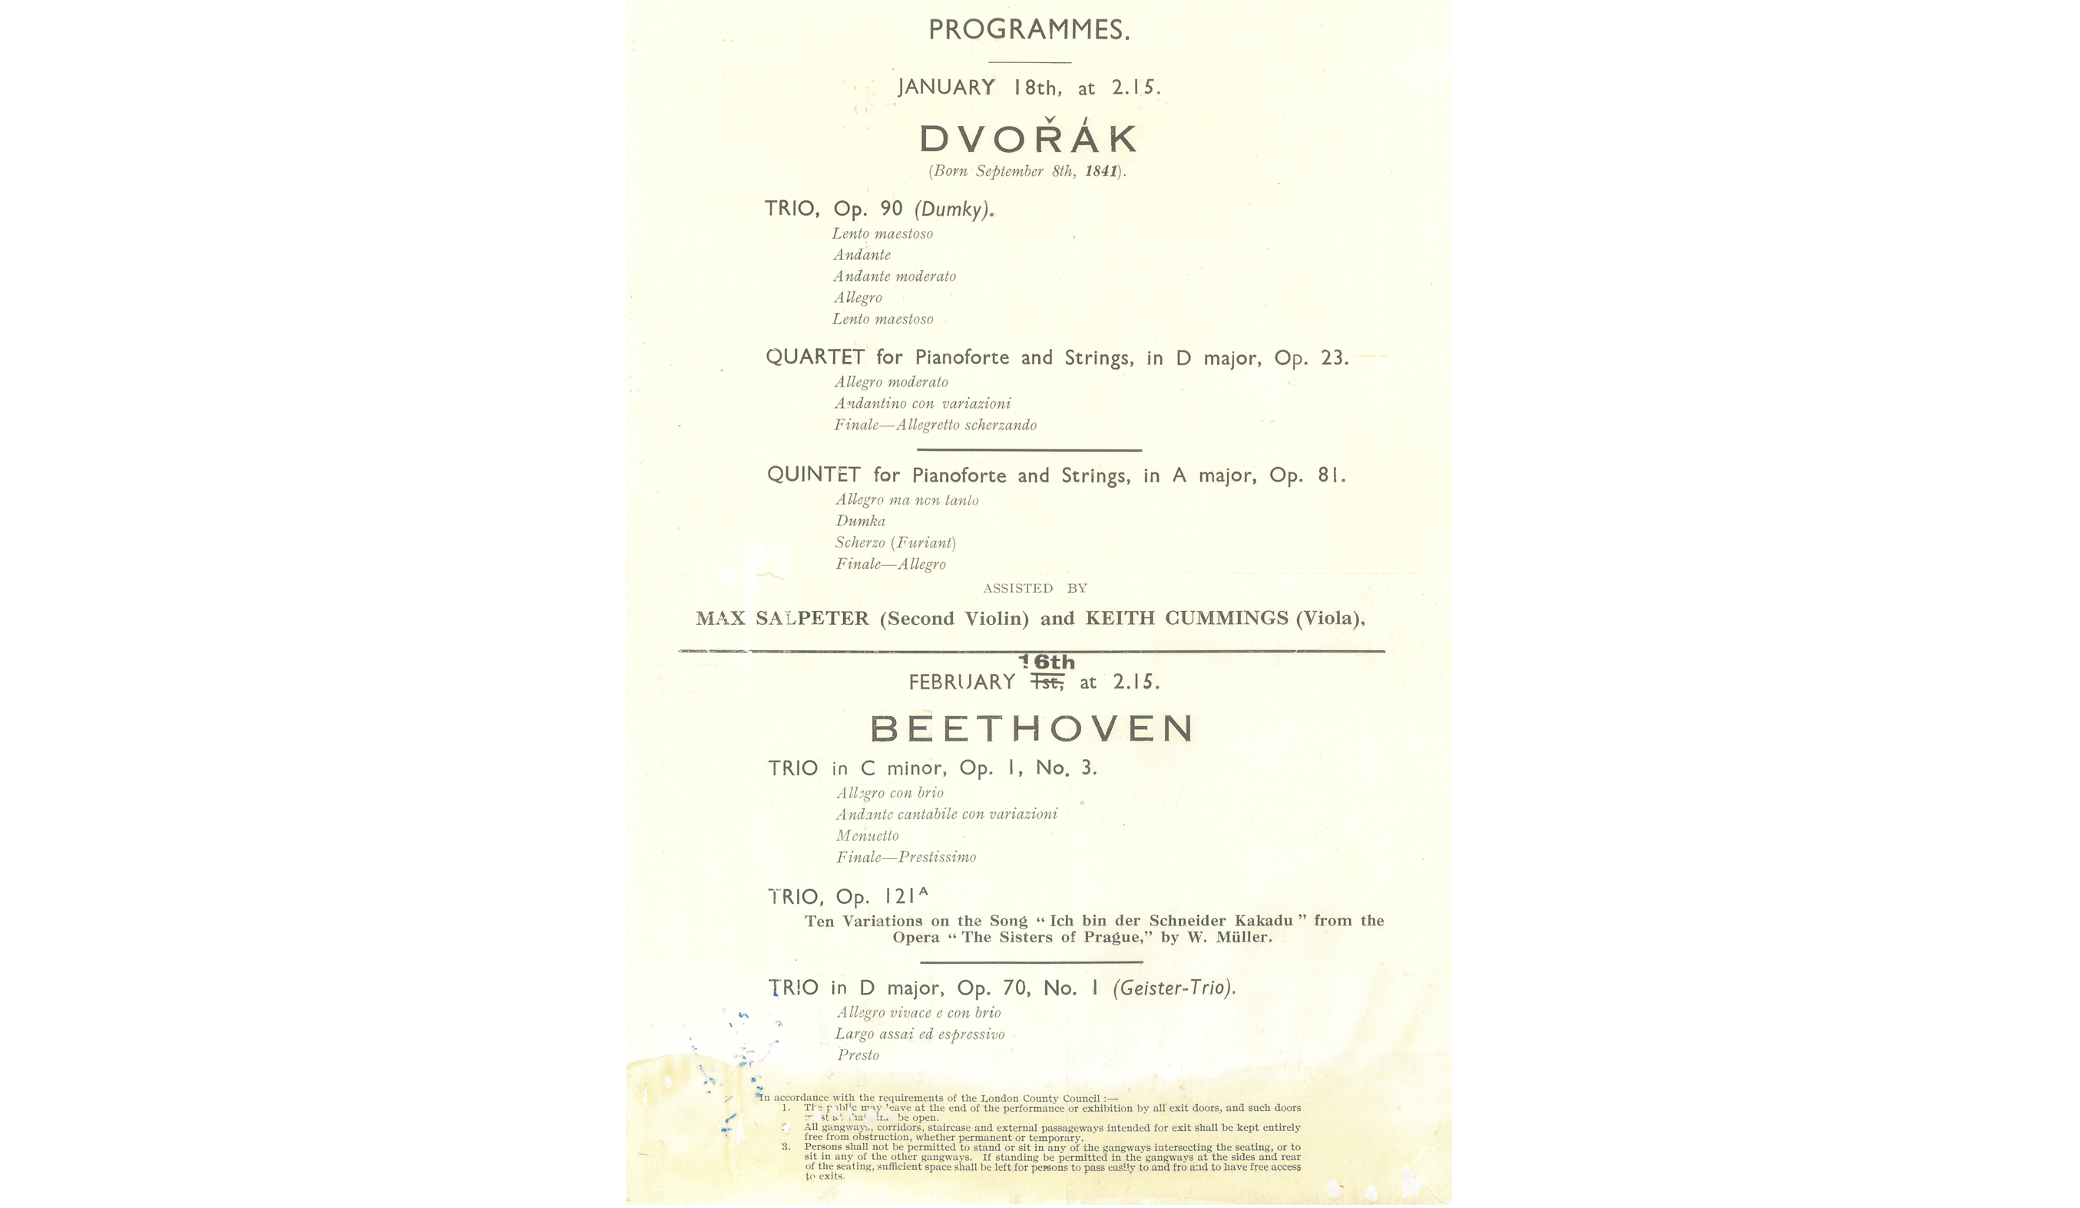 A concert programme with the list of musical works by Dvorak performed on January 18th, and a list of musical works by Beethoven that was performed on February 16, by the Czech Trio.